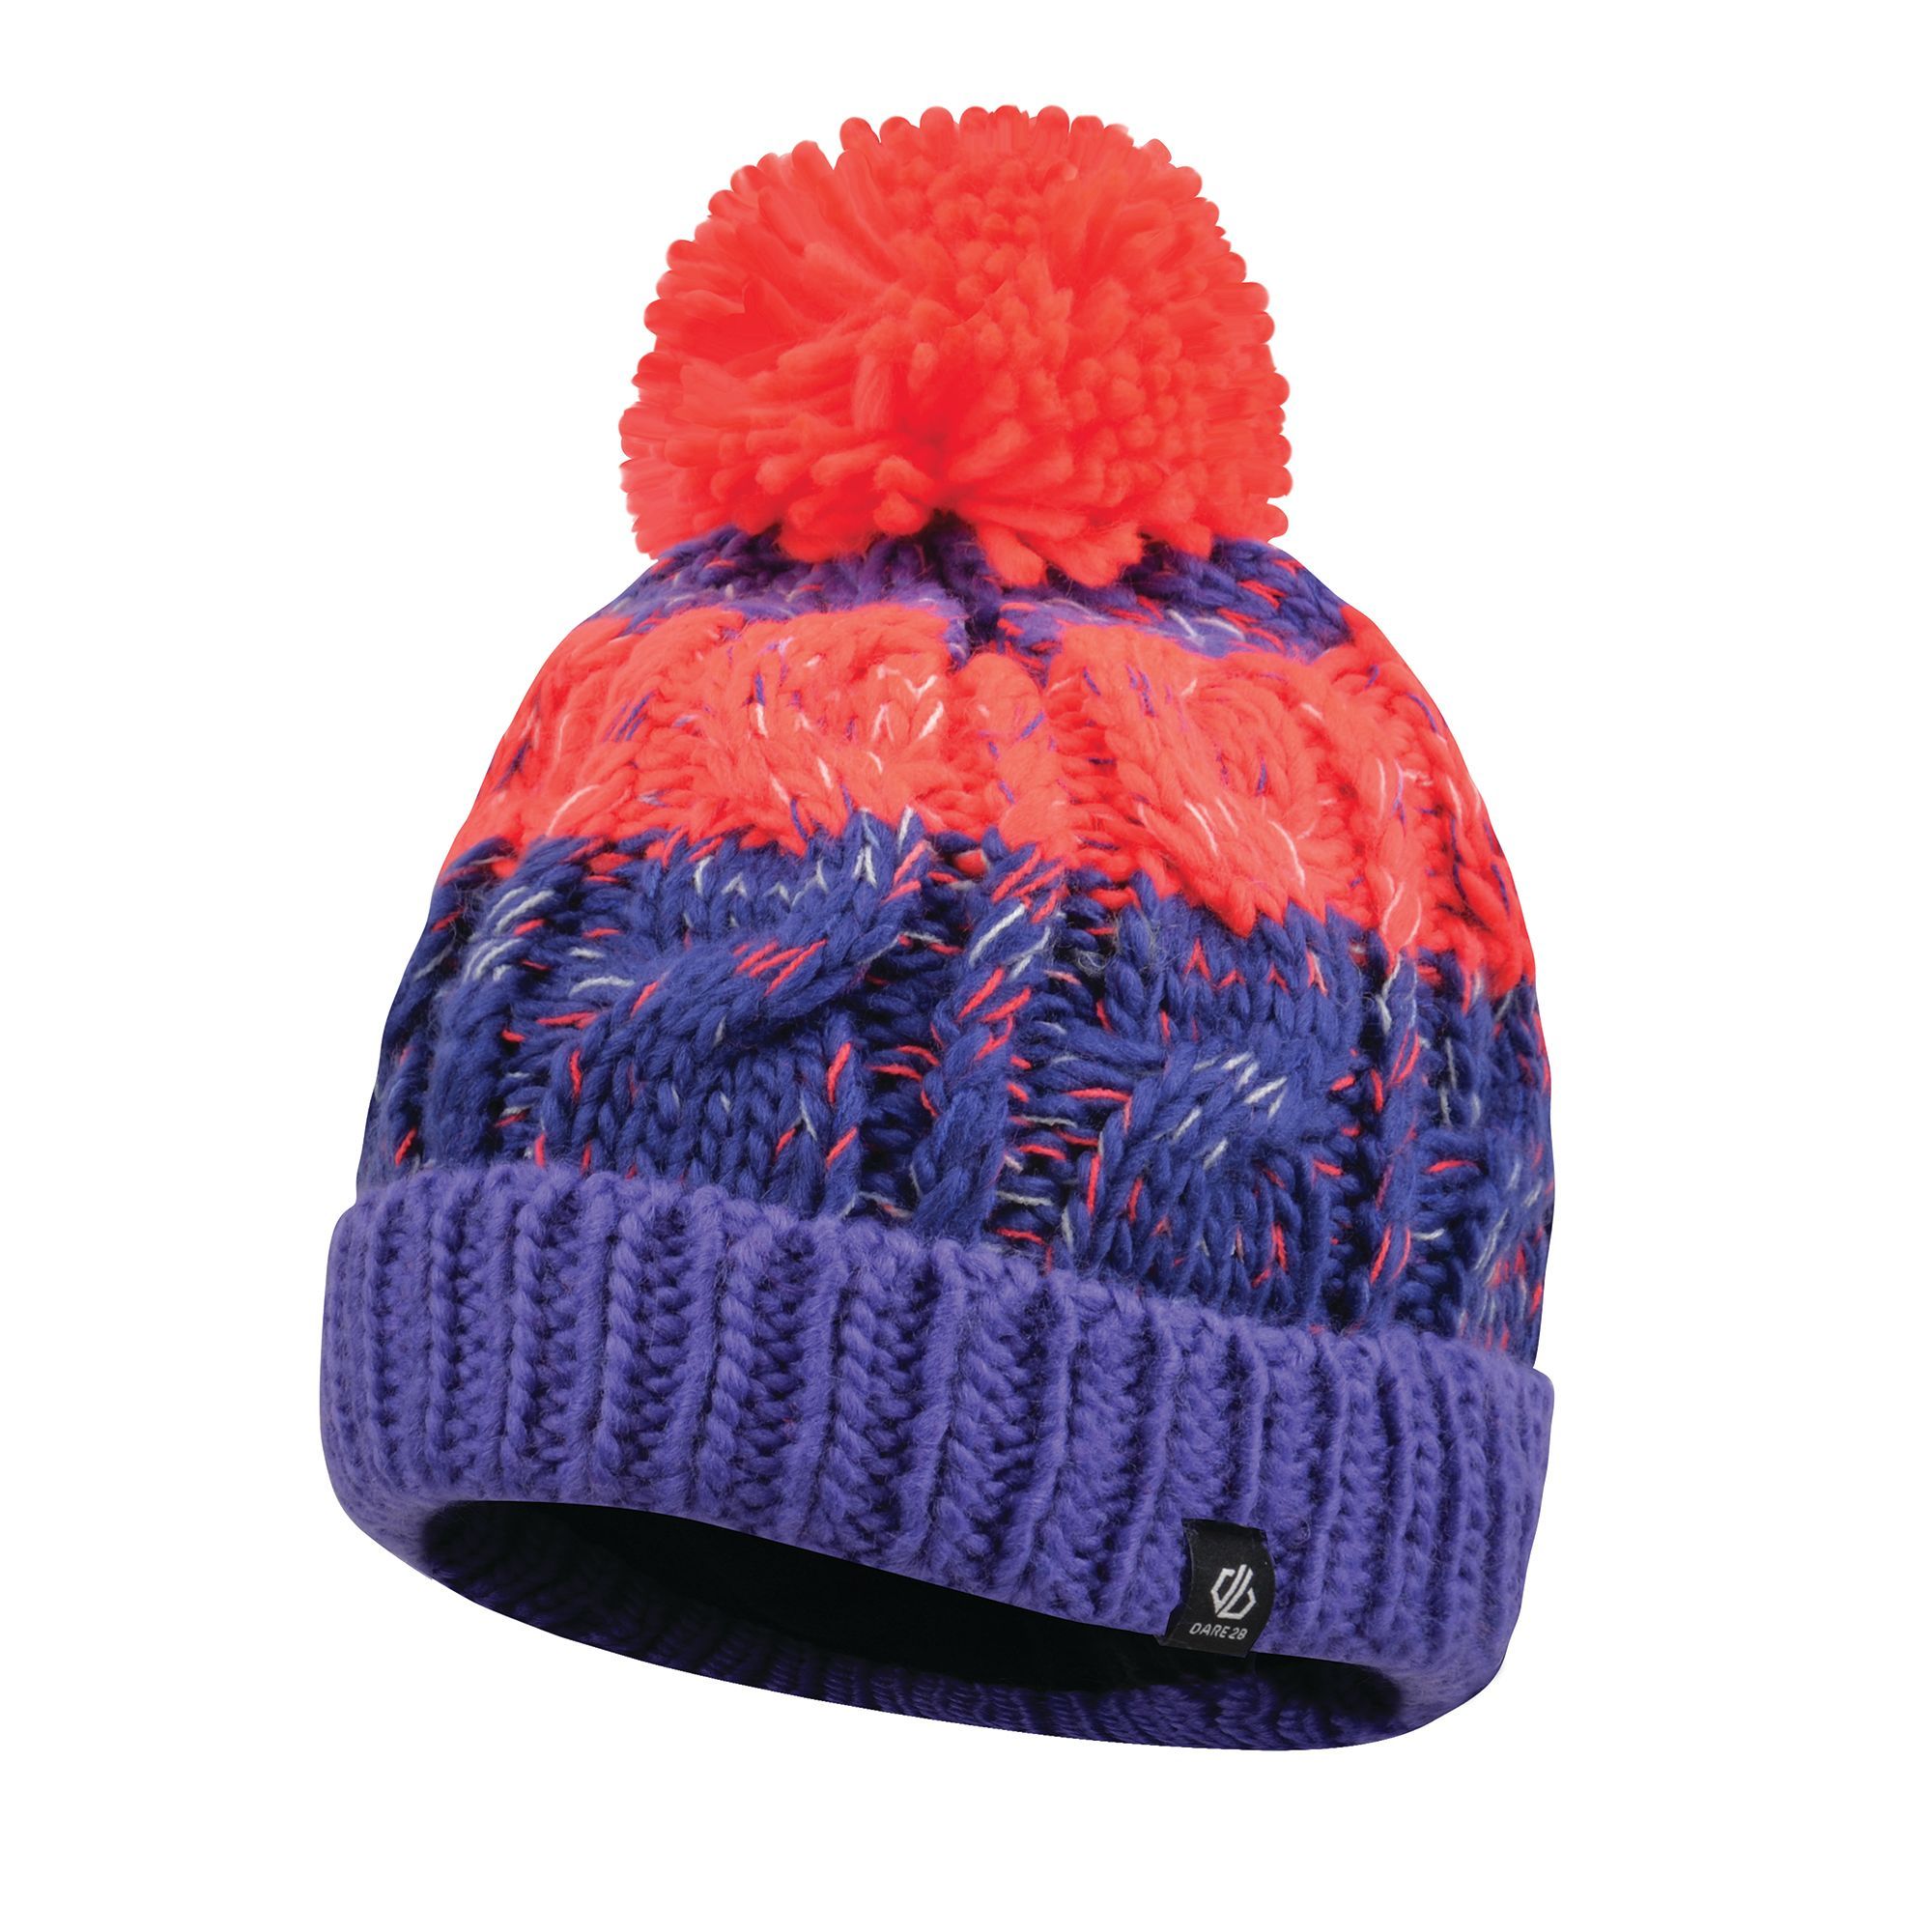 Material: acrylic: 100%. Soft knit construction. Fleece lining. Bobble detail. Knitted ribbed cuff.